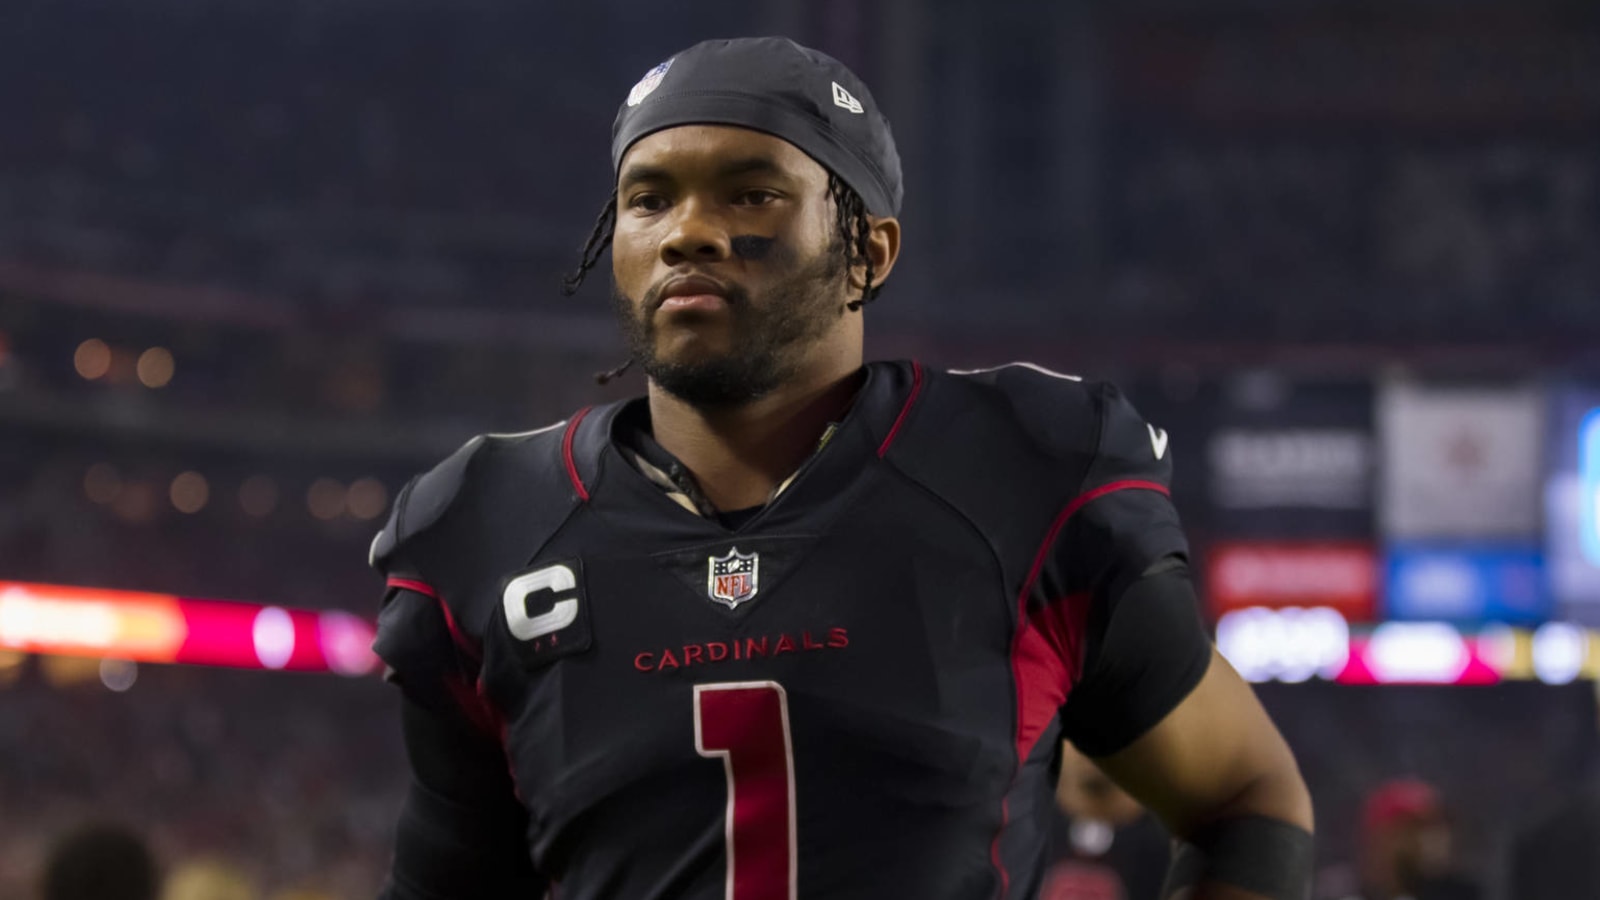 Cardinals GM: We'll be 'smart' with Kyler Murray's injury